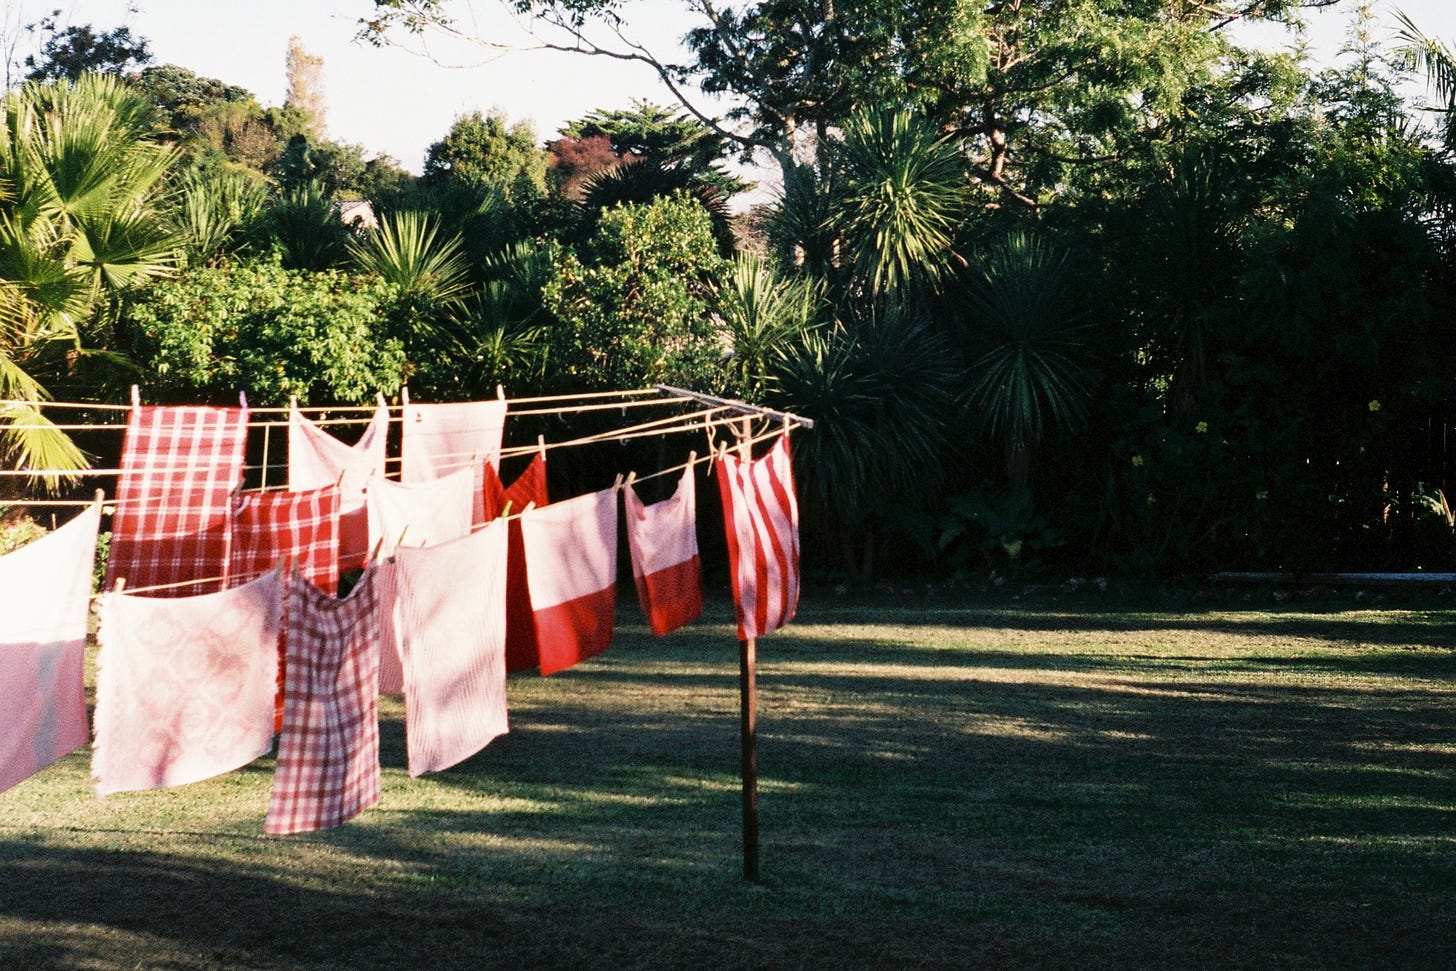 red-and-white tea towels drying on a ricketty washig line in a lush green garden flanked by spiky palm leaves and fluffy shrubs. The hour of the afternoon is late and the shadows are long on the lawn. It is time to take the washing in.